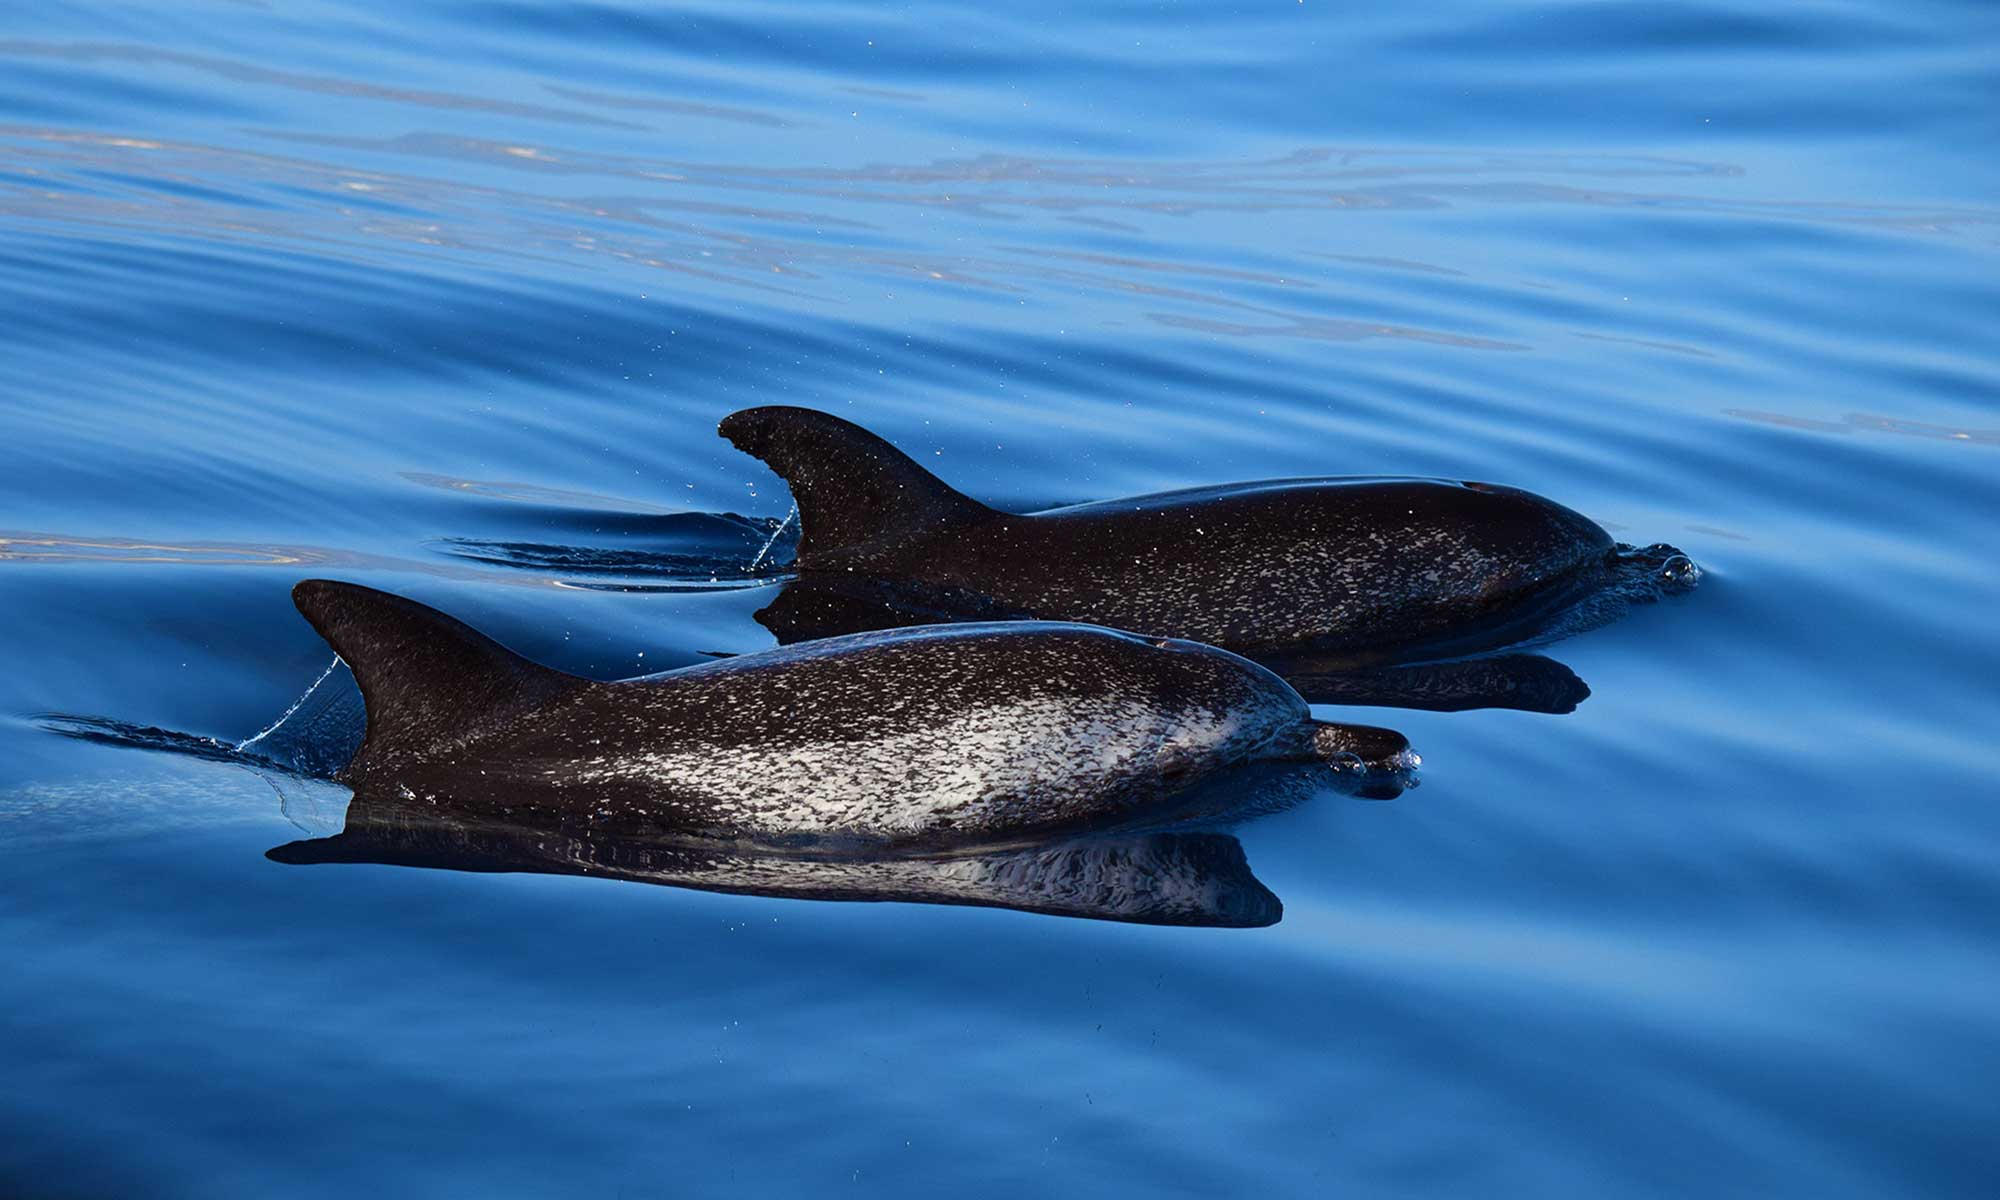 Spotted dolphins were often encountered during October whale watching tours from Funchal.